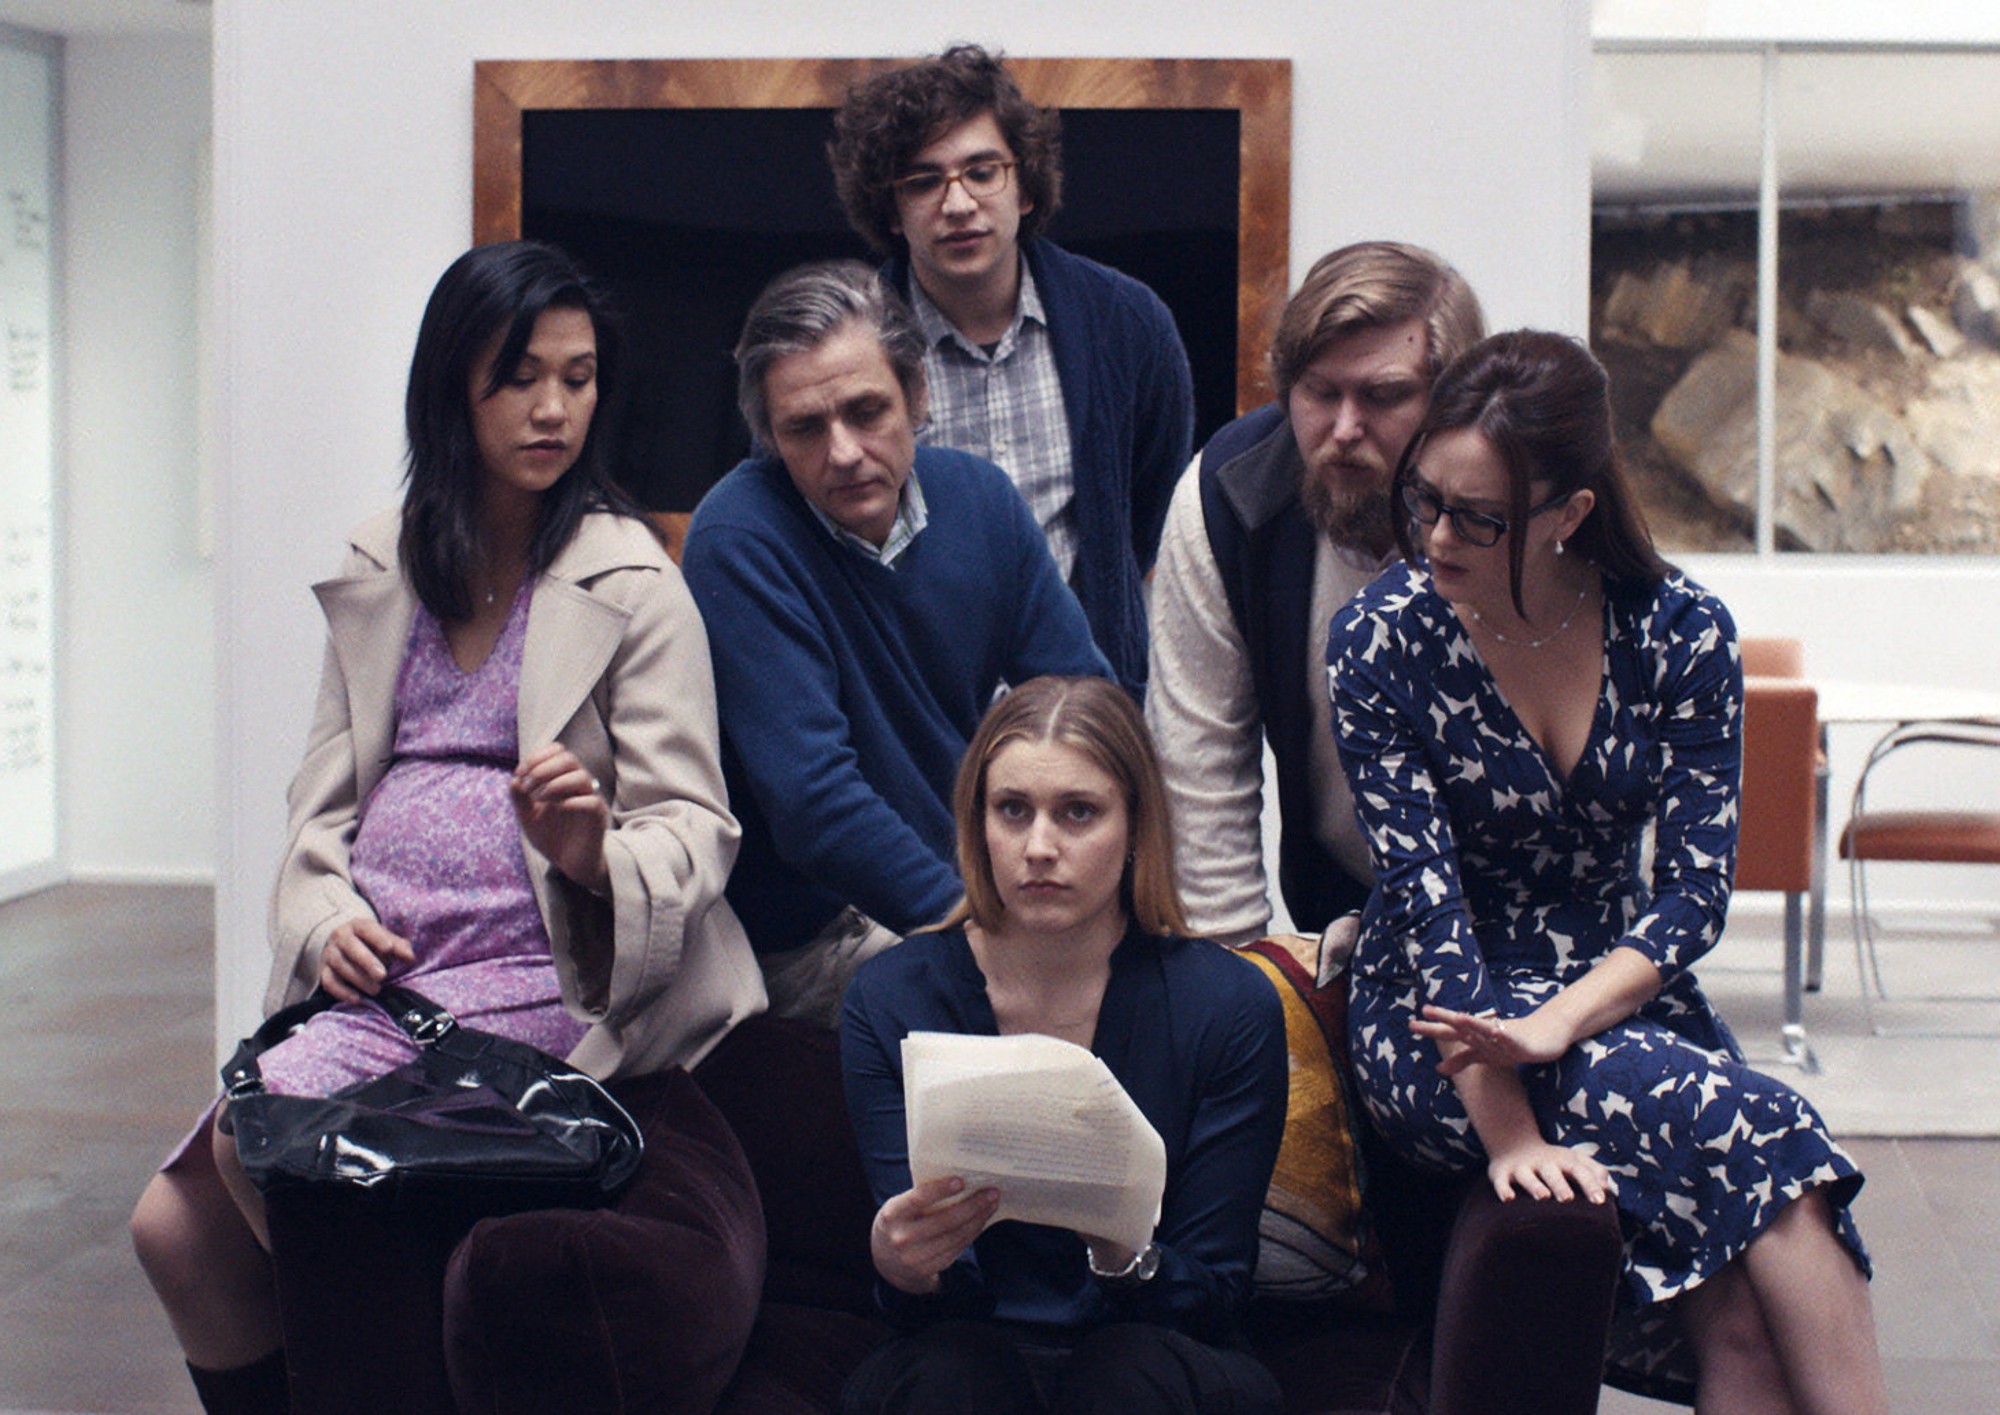 Image from the motion picture Mistress America